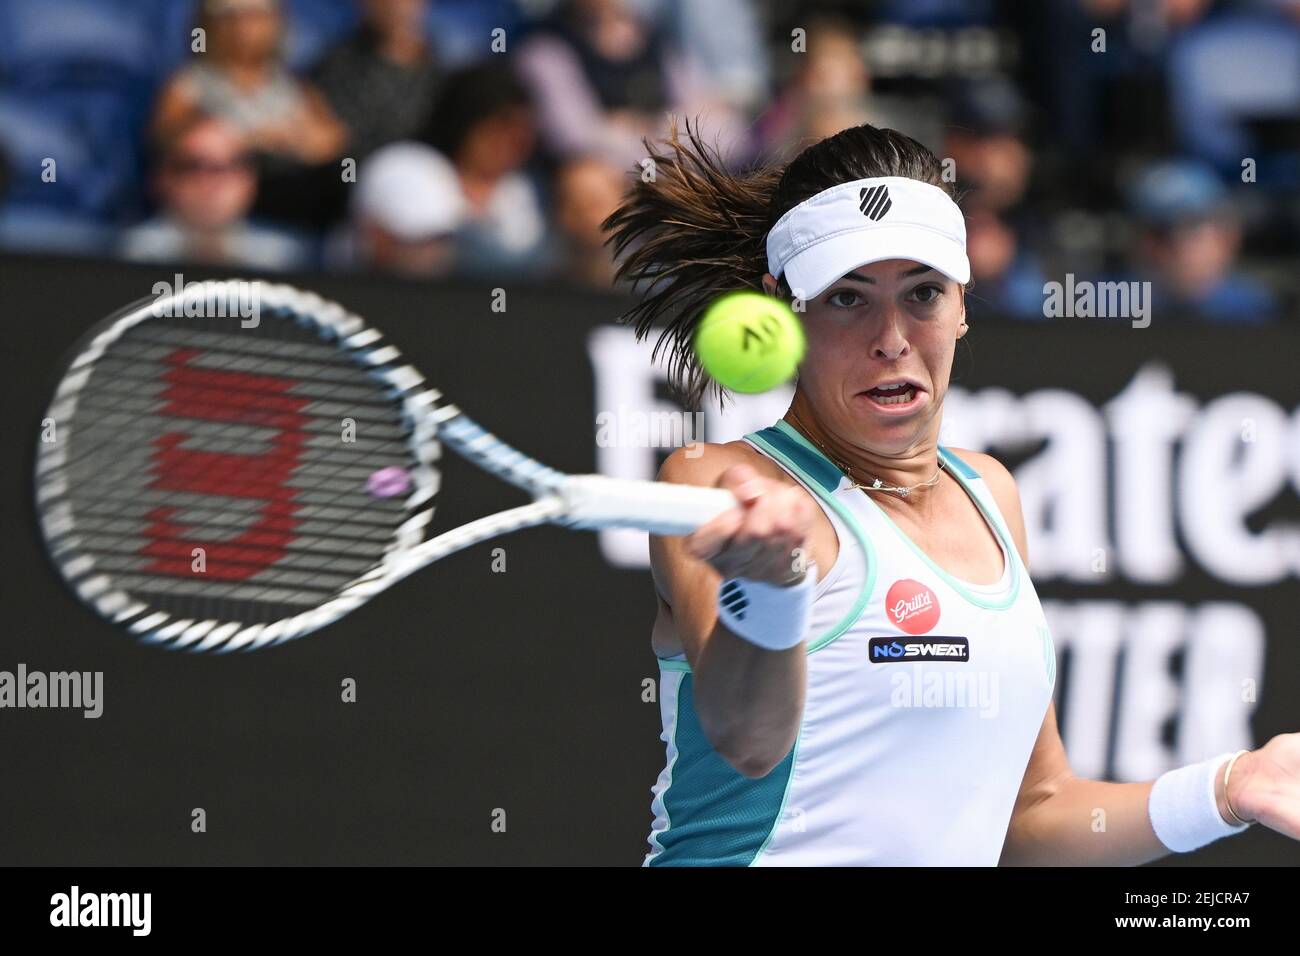 January 23, 2020: AJLA TOMLJANOVIC (AUS) in action against GARBINÌƒE MUGURUZA (ESP) on Rod Laver Arena in a Women's Singles 2nd round match on day 4 of Australian Open in